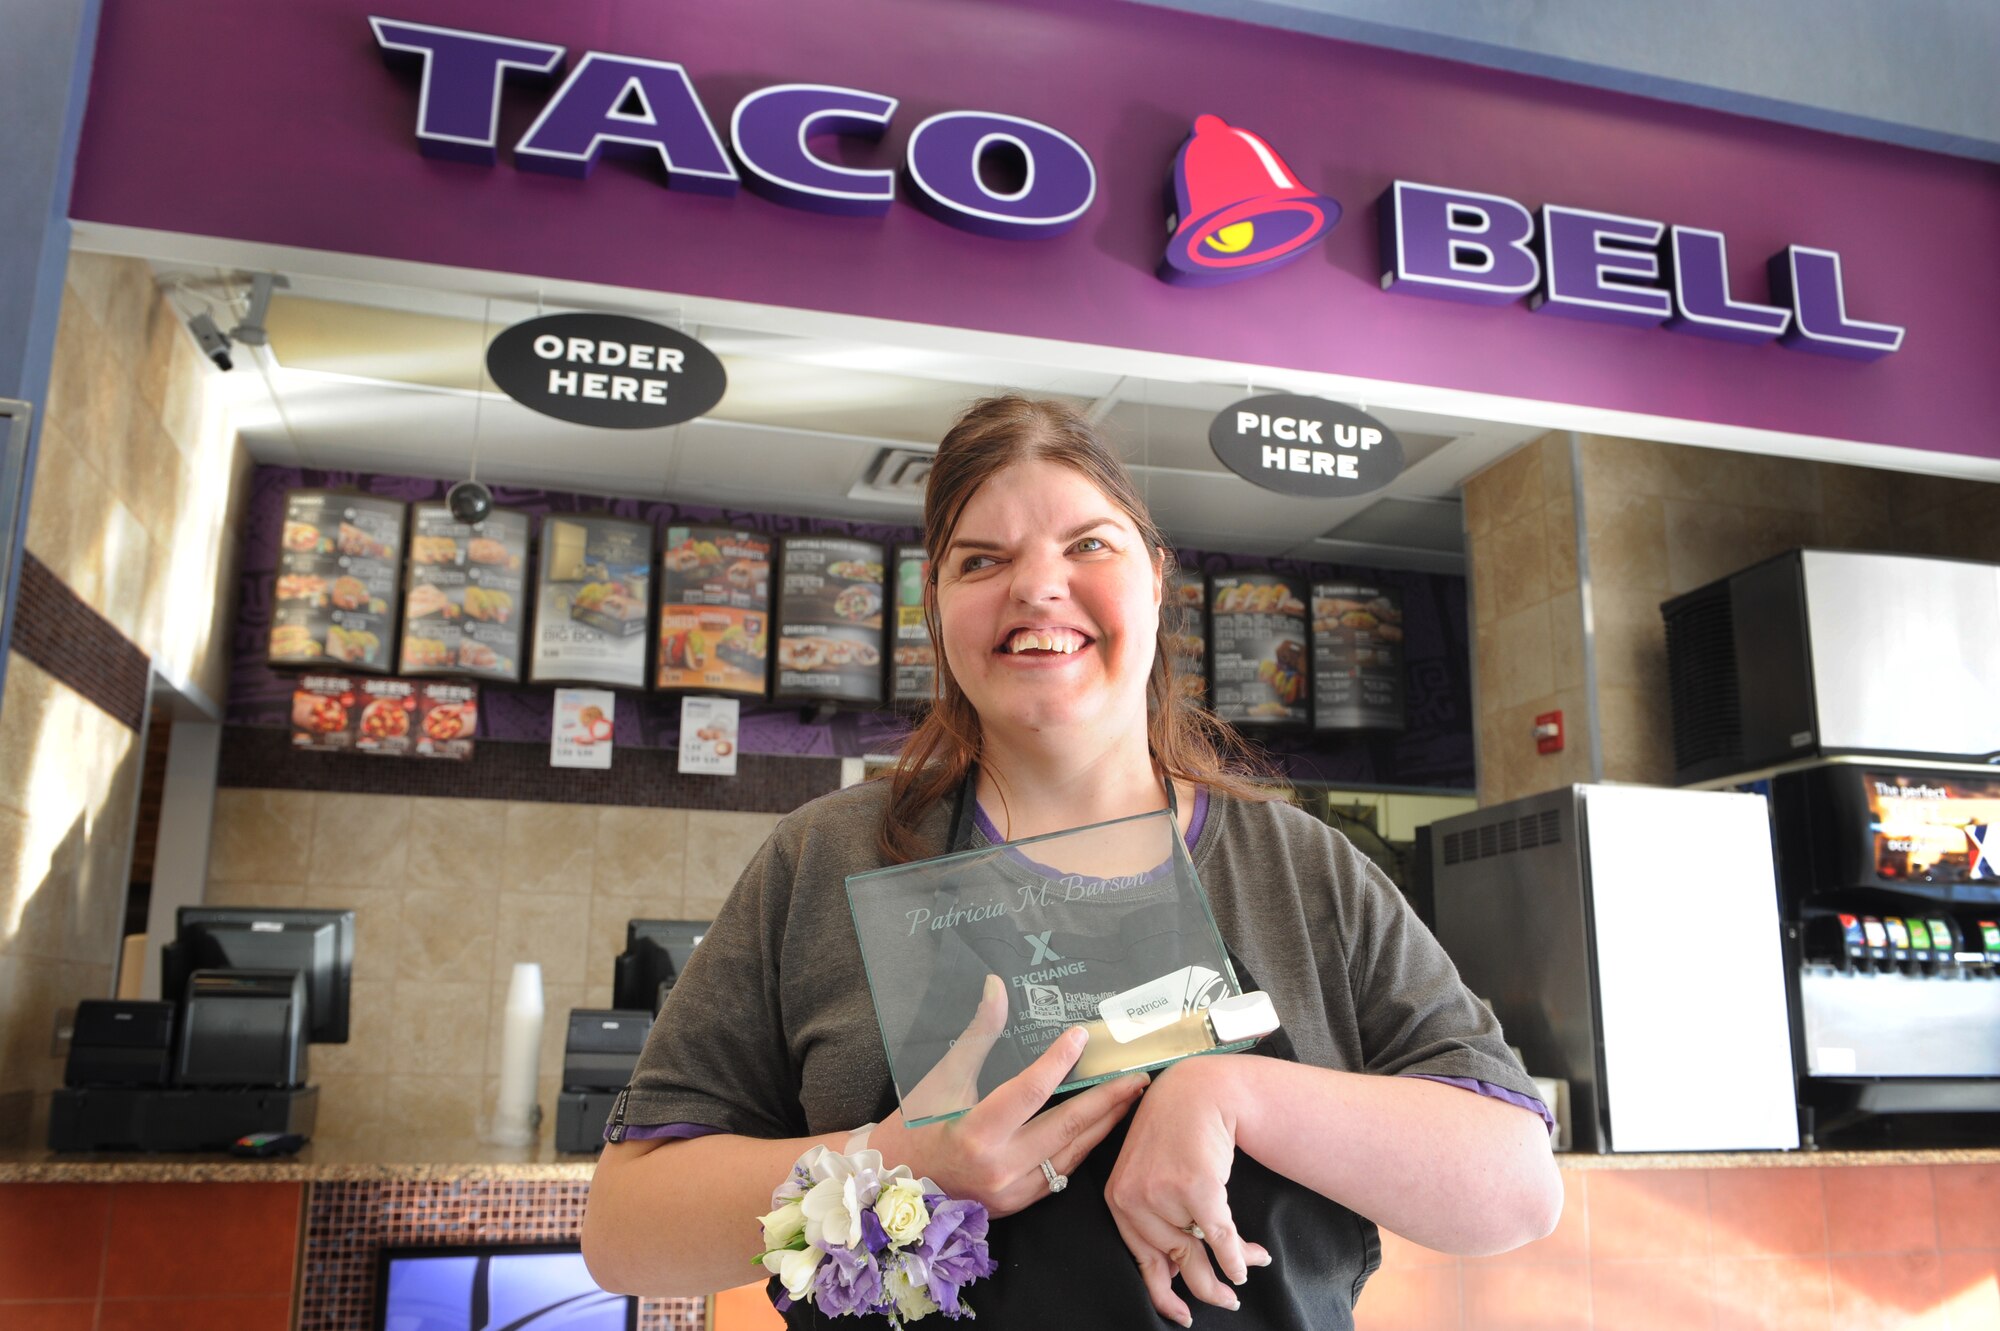 Patricia Barson, who works at Taco Bell in Hill's Exchange Food Court, was honored today as one of the Department of Defense’s Outstanding Employees with a Disability. Patricia was selected for the award from among AAFES 32,000 worldwide employees.(U.S. Air Force photo/Micah Garbarino)